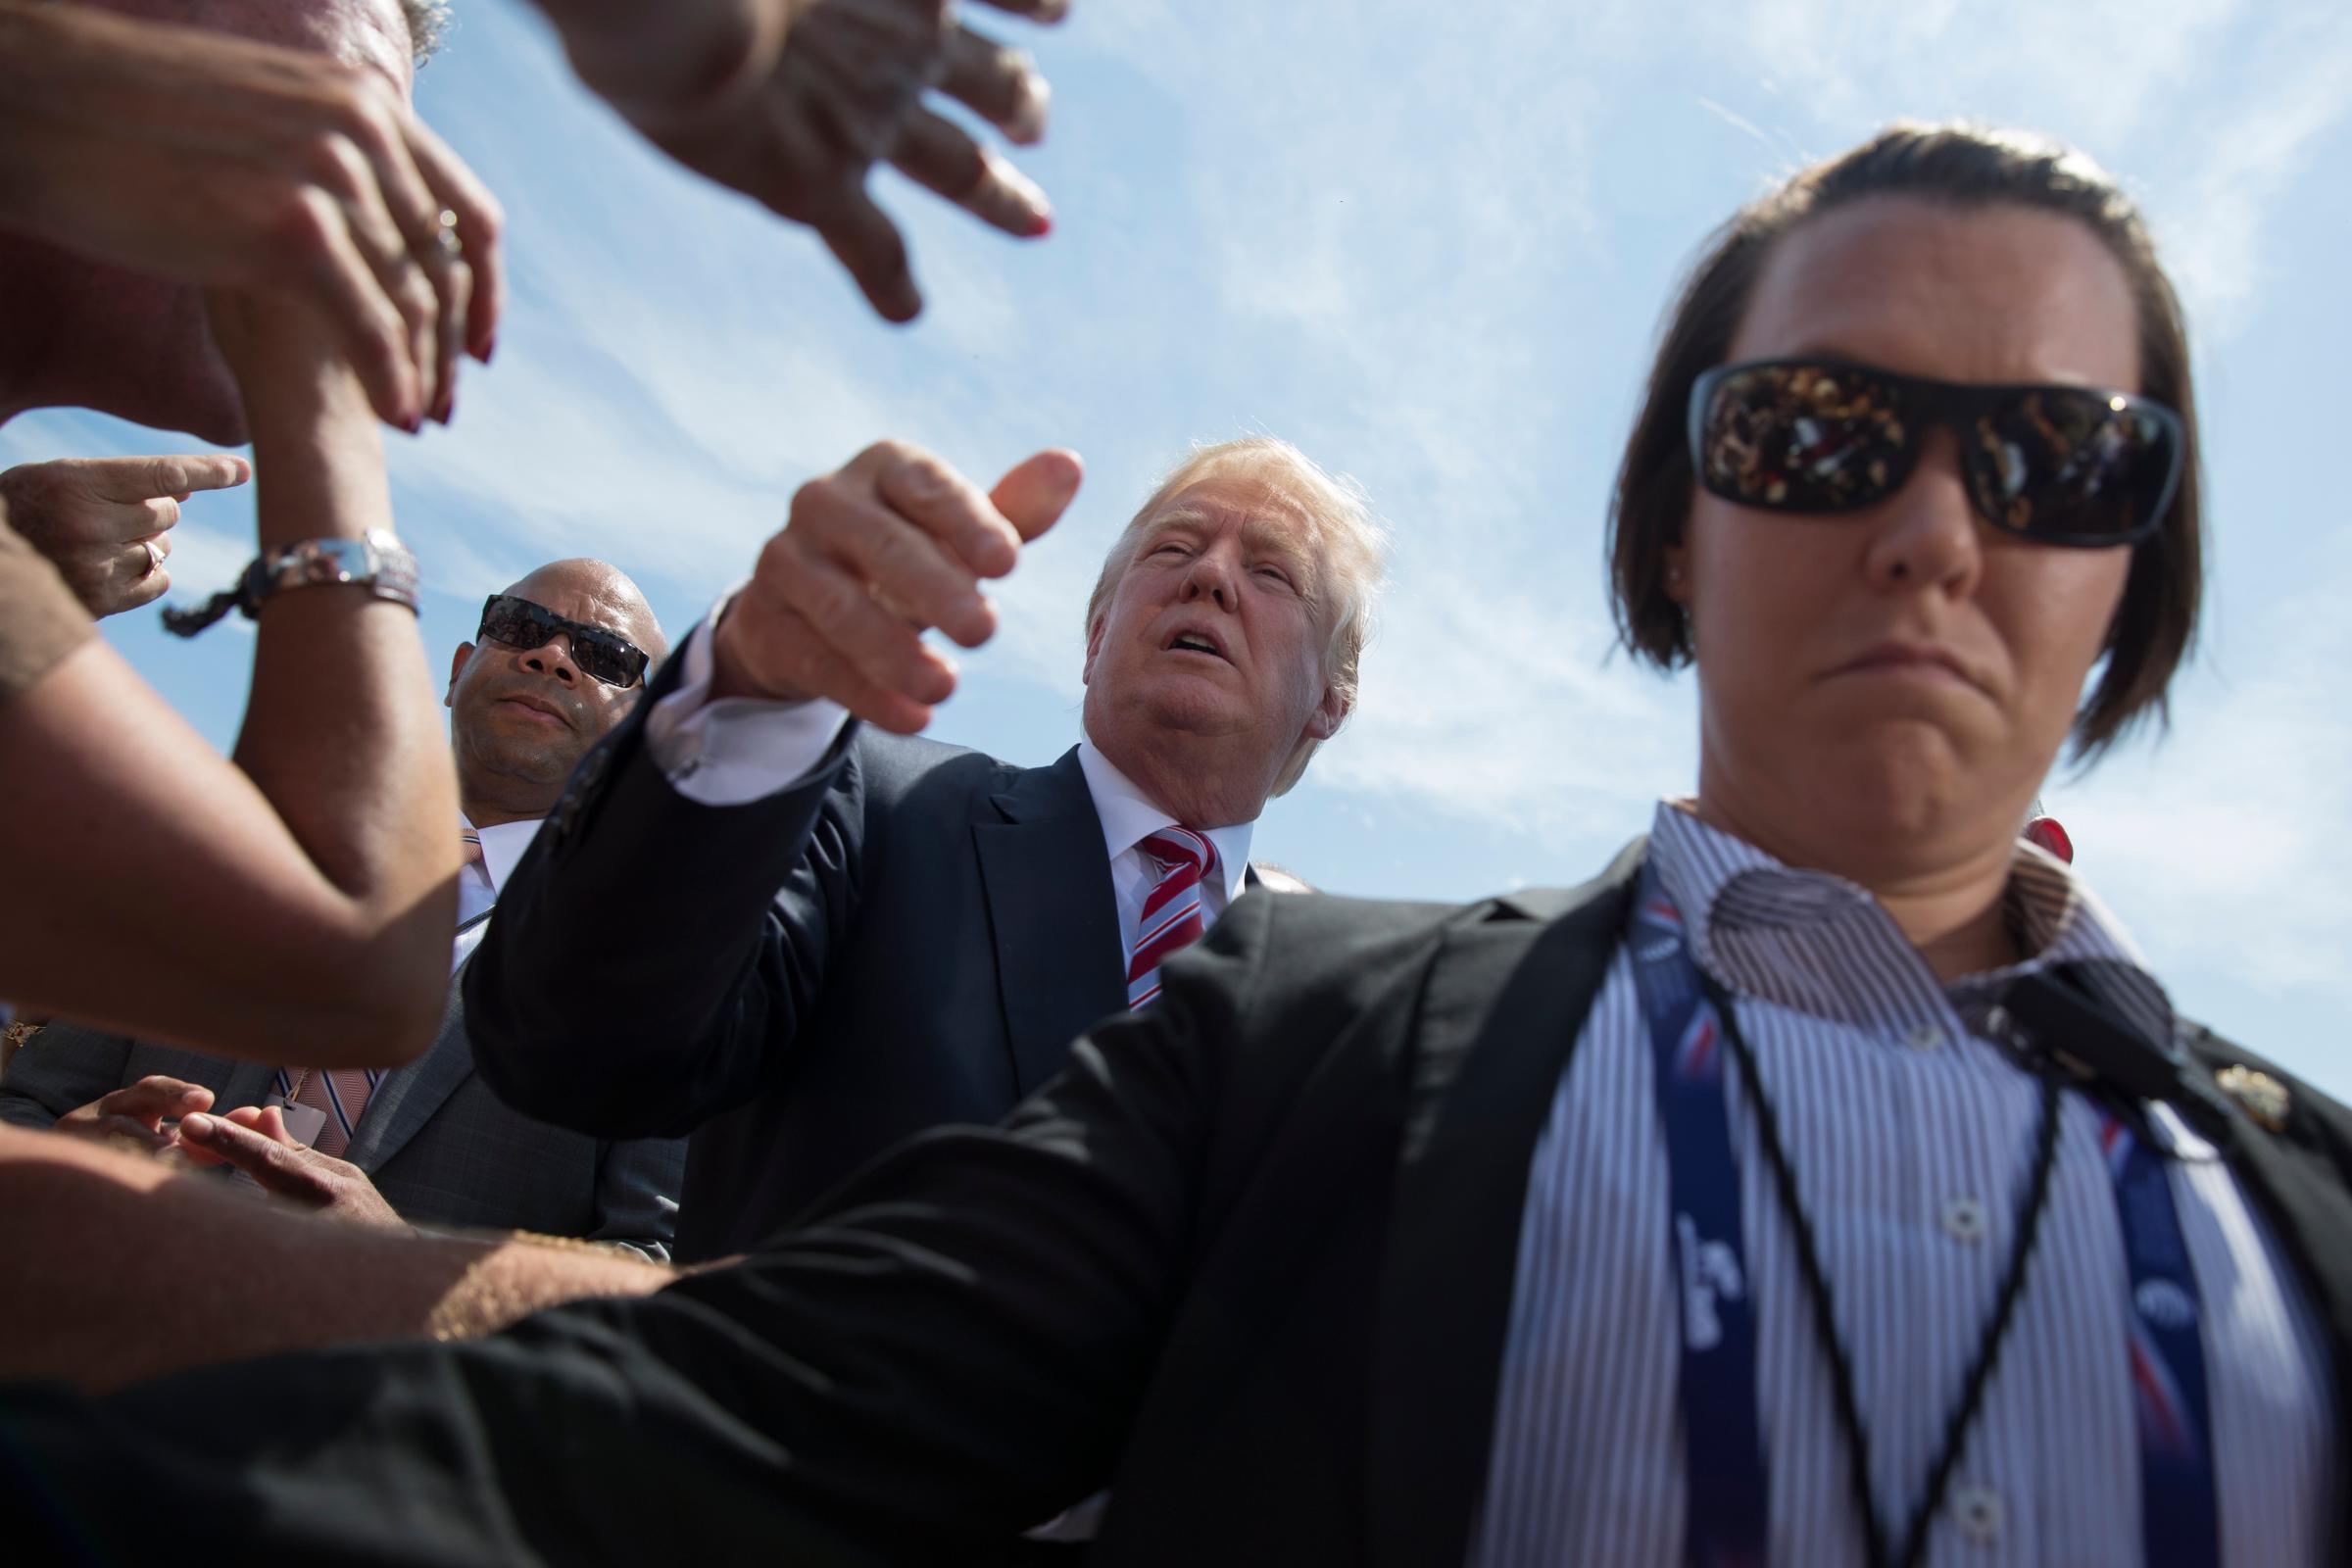 Republican presidential candidate Donald Trump shakes hands with supporters after landing at a site of the Republican National Convention, July 20, 2016, in Cleveland.